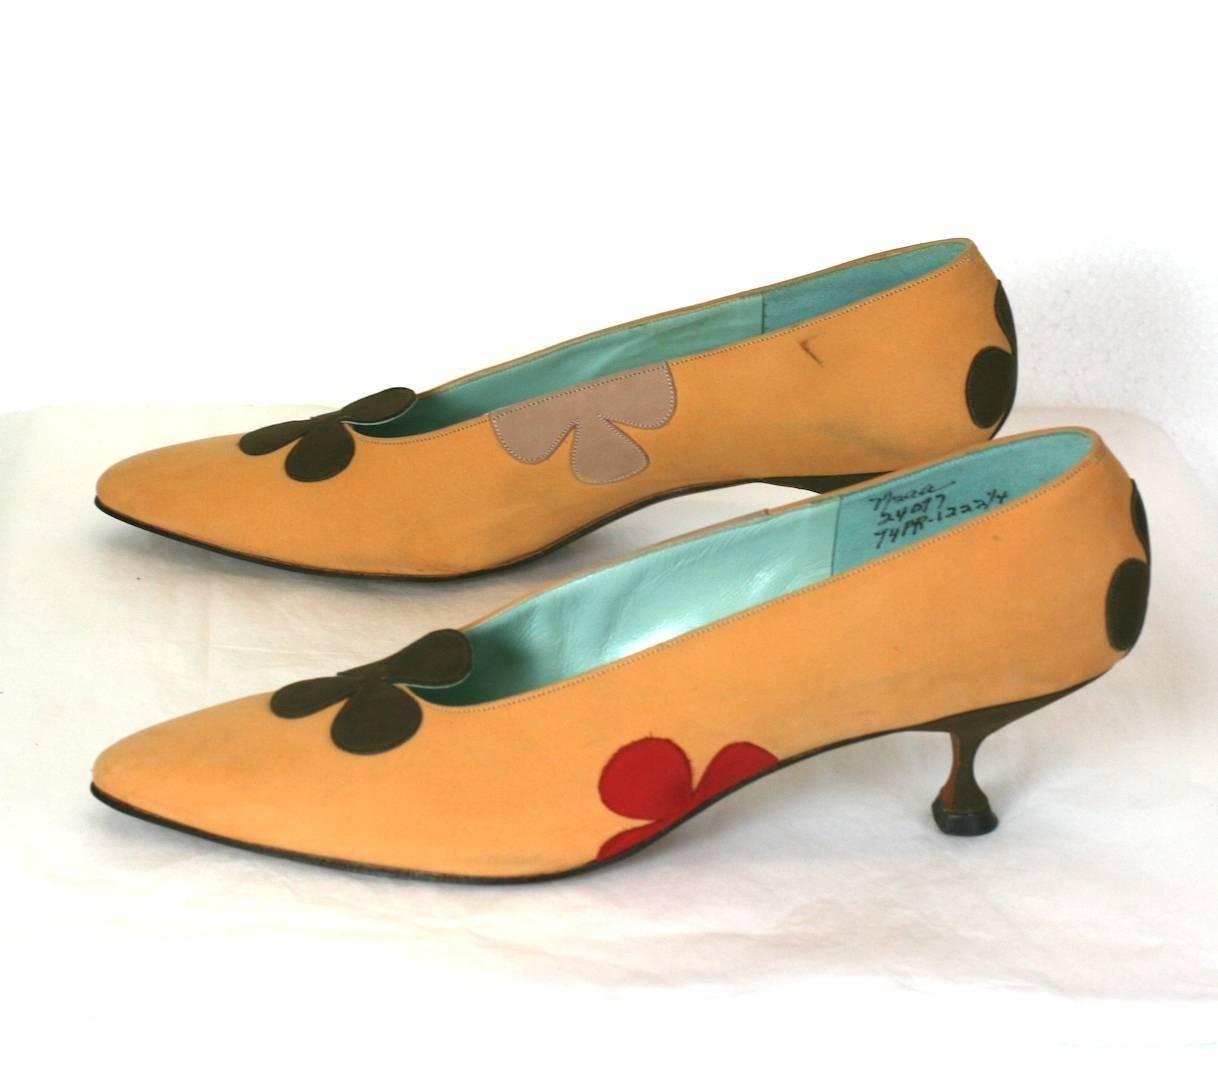 Charming floral kitten heel pumps with graphic appliques. Pale peach suede is applied with quatrefoil florals in brown, oxblood and pale buff. 1960's USA. 
Vintage Size 7.5 2AA, Very narrow, Length on sole 10.25". Widest are on sole 2.75".